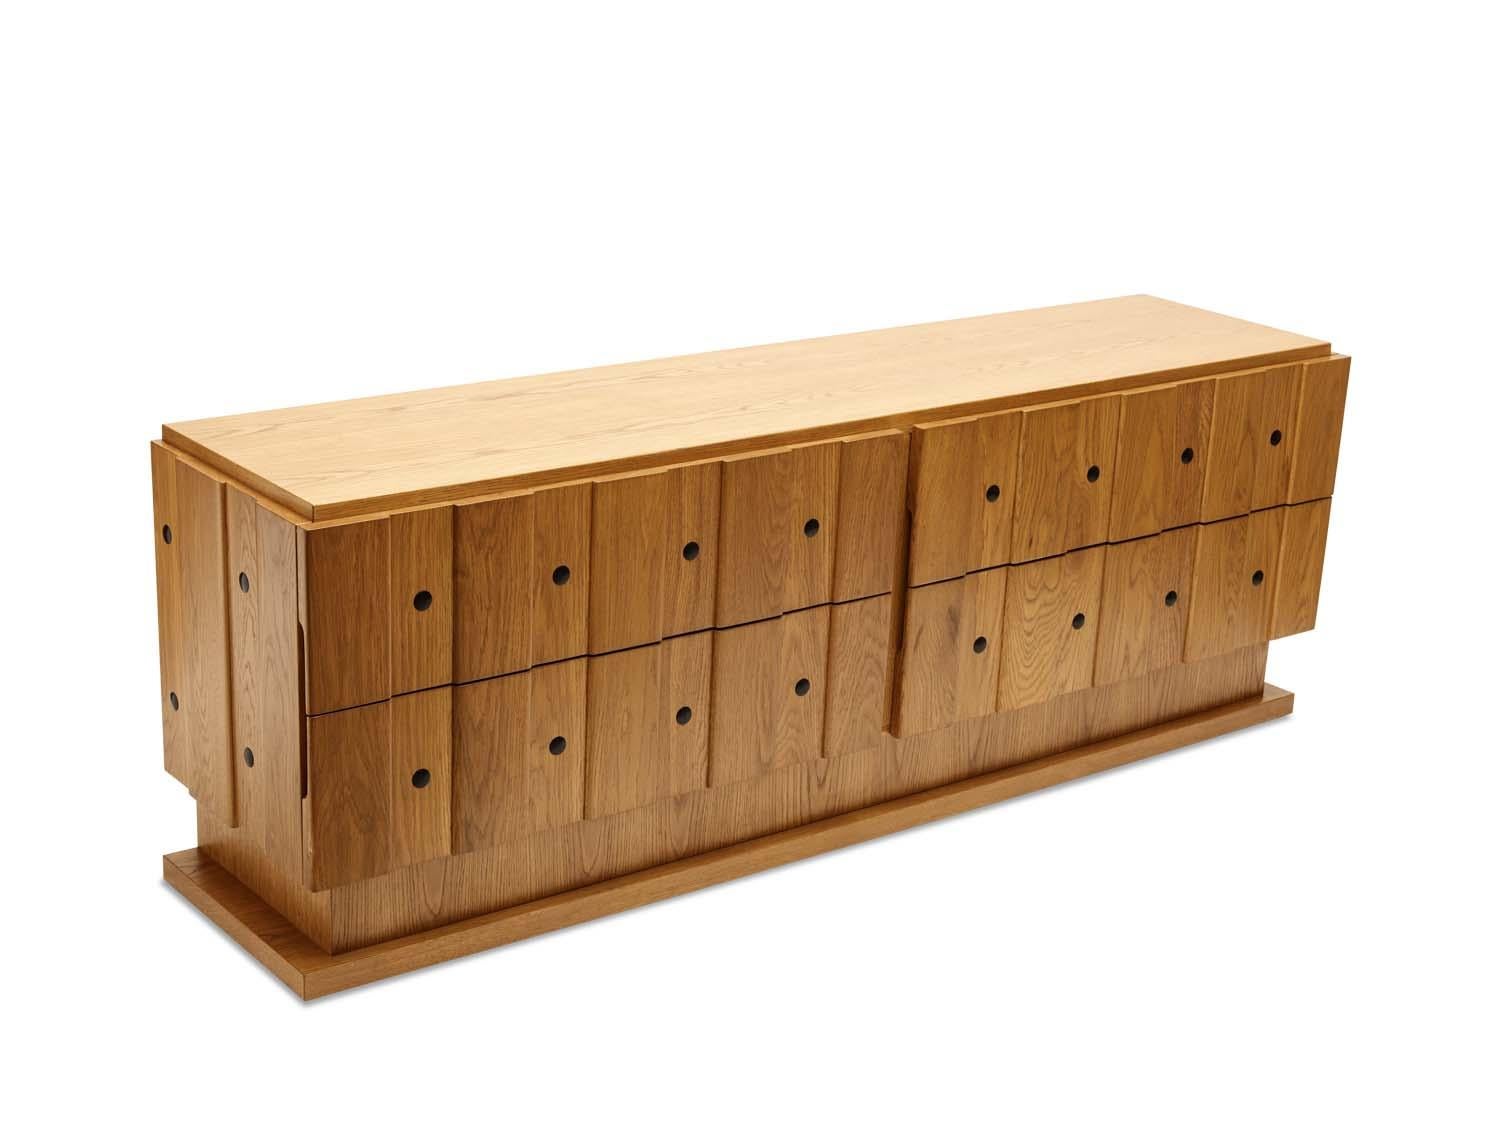 The Ojai dresser features four board and batten drawers with iron details. Available in 60